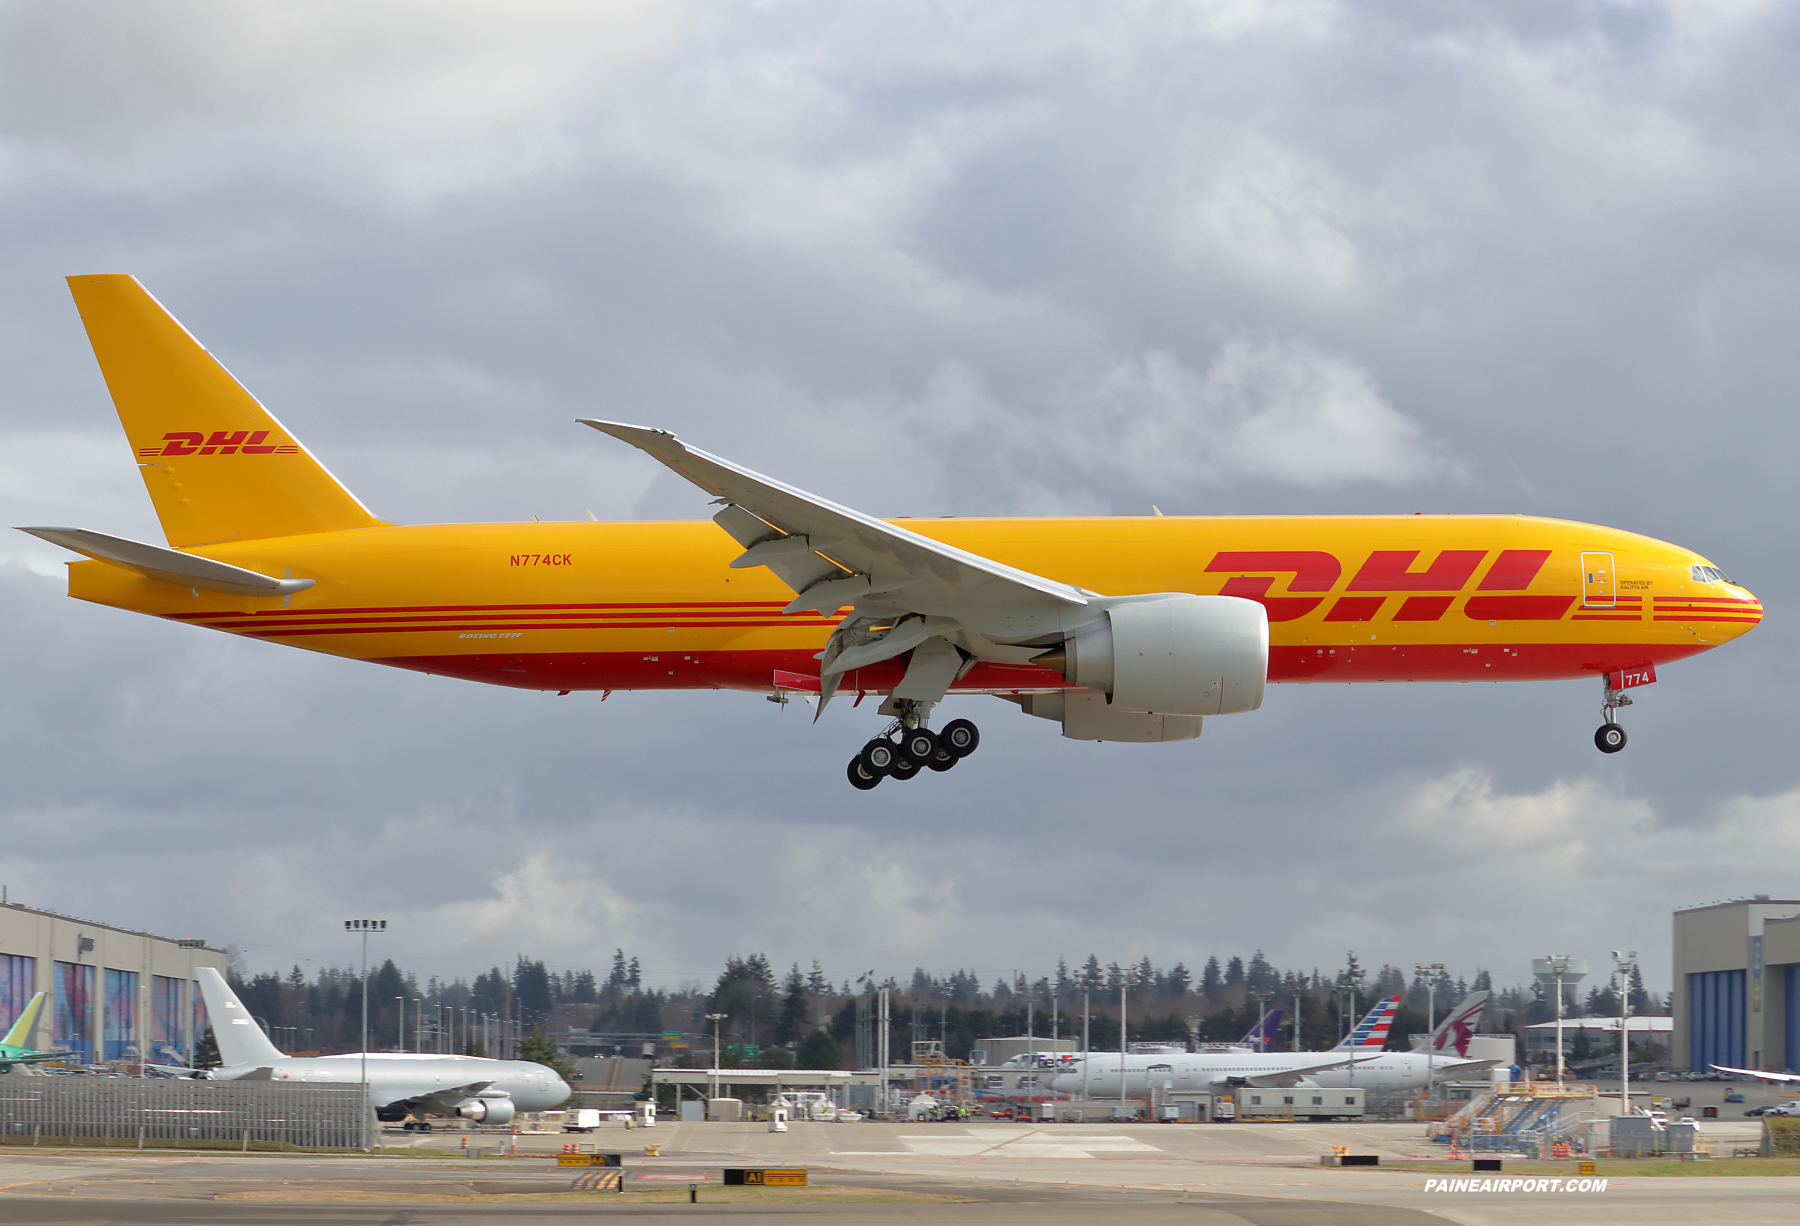 DHL 777F N774CK at Paine Field